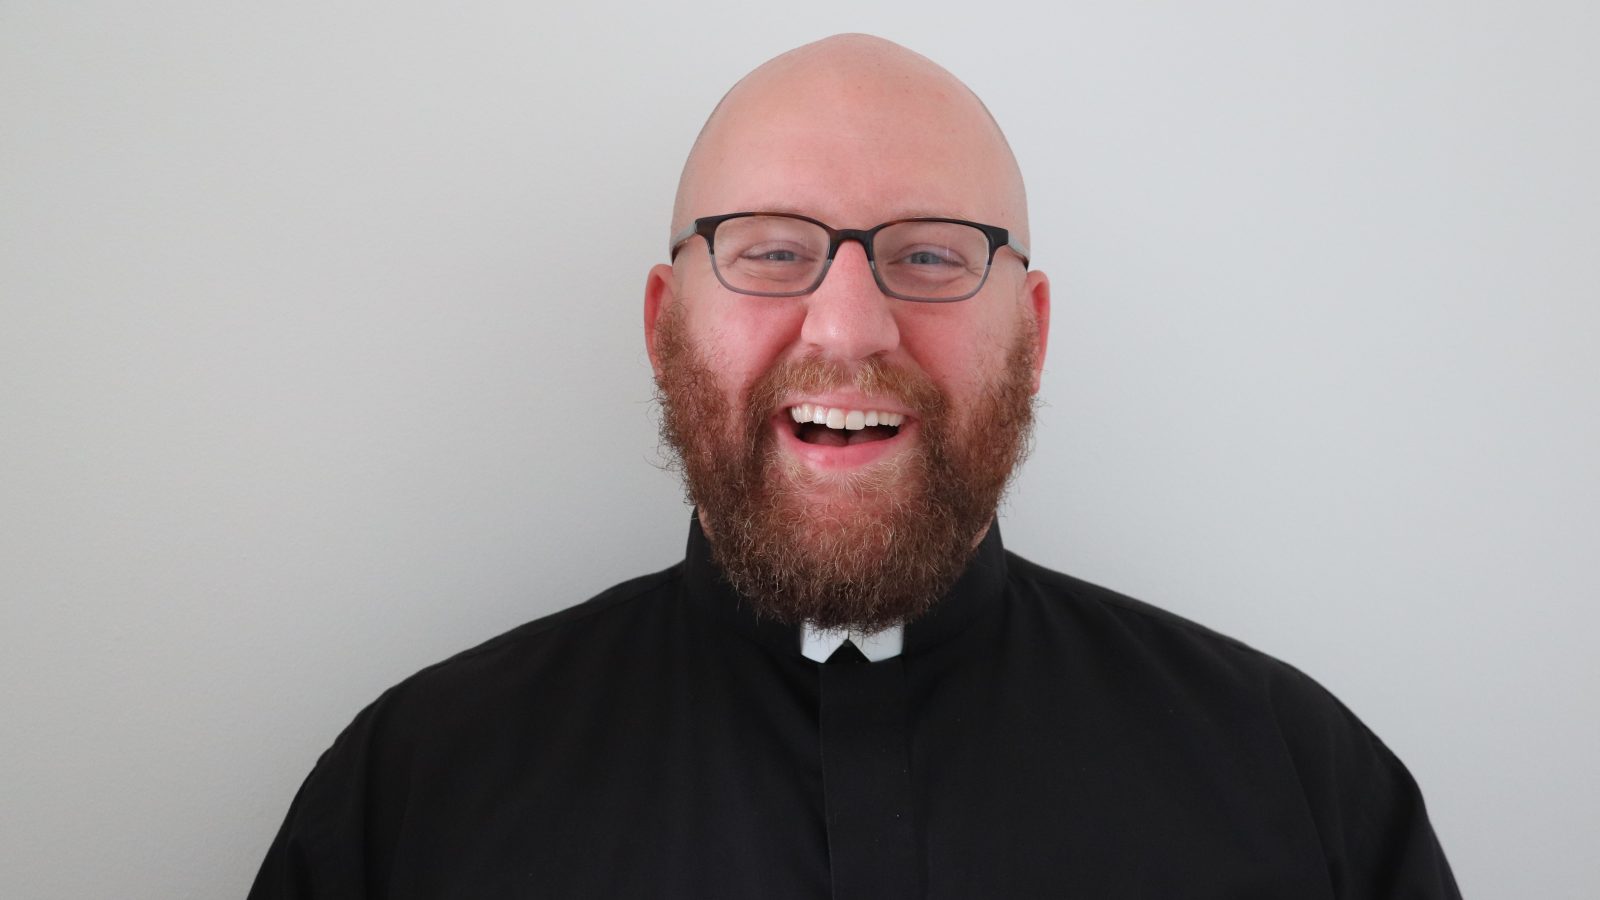 A headshot of Ken Homan (G'25) who is wearing glasses and is dressed in black with a white collar. Ken is a Jesuit brother and part of the Society of Jesus.